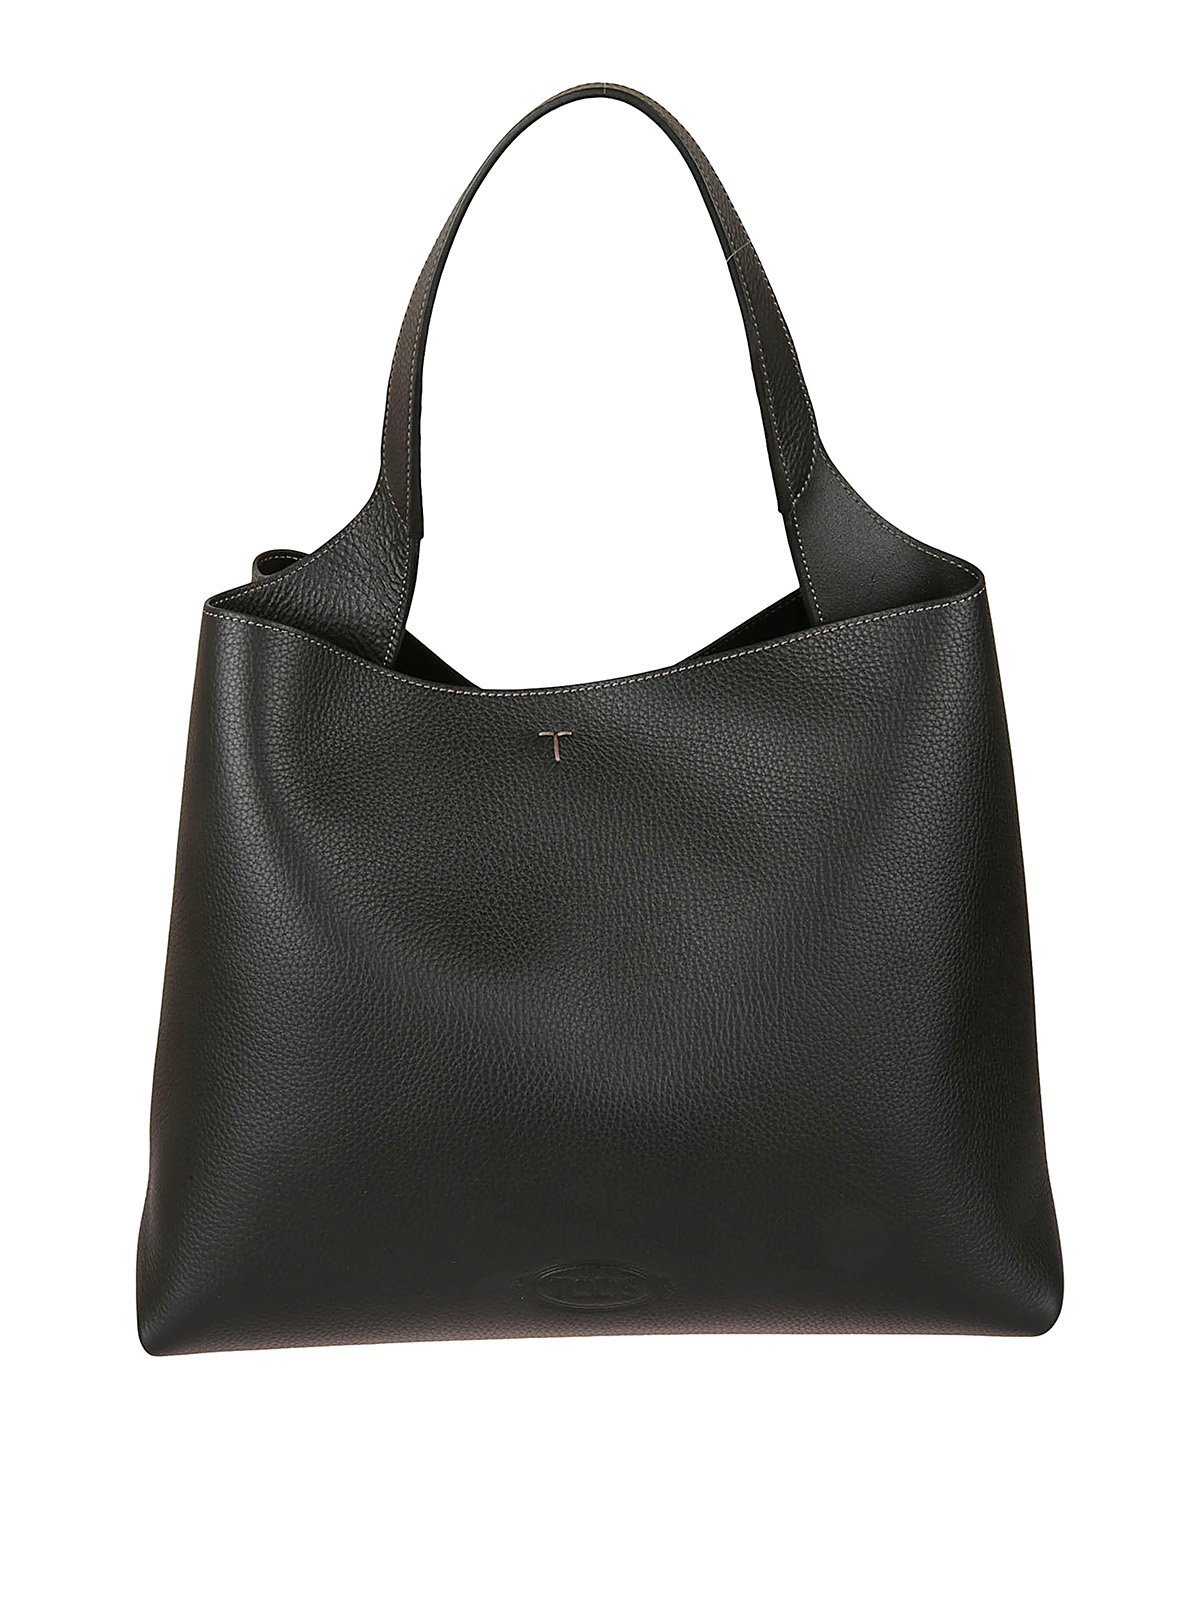 TOD'S LEATHER TOTE